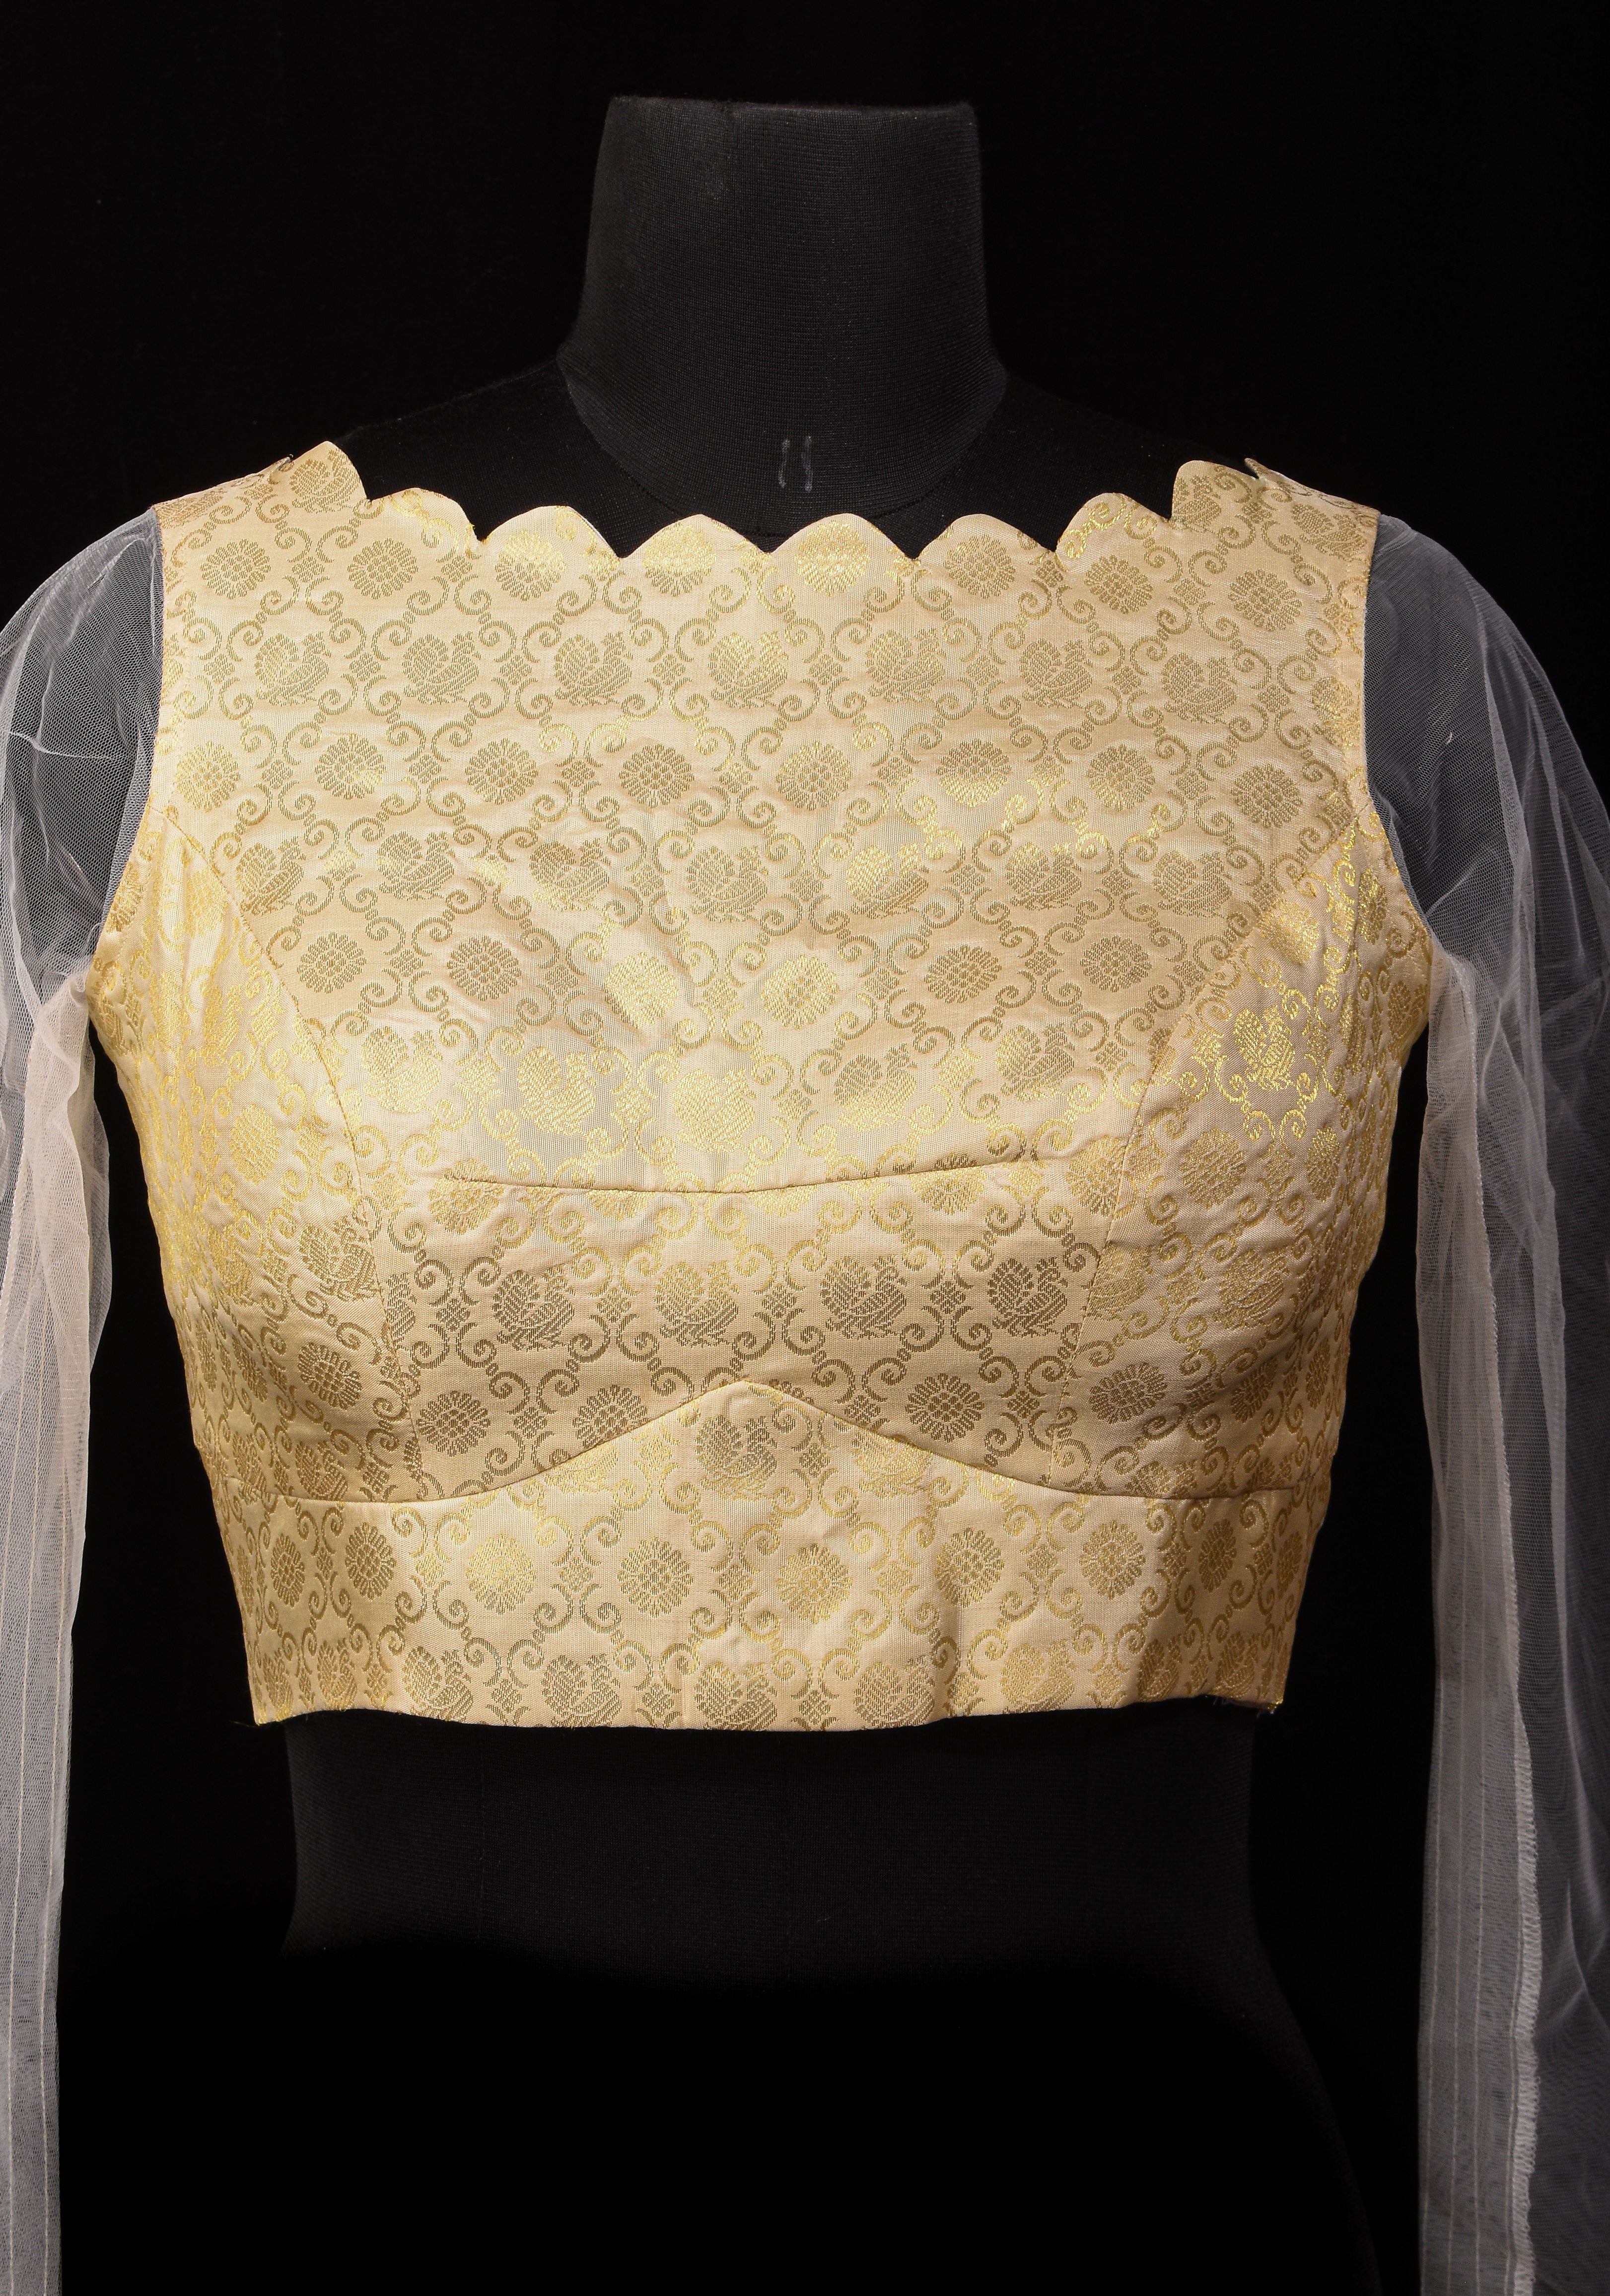 Ivory Kanjivaram Brocade Pure Silk Blouse with Scalloped Neckline and Sheer Sleeves, customizable, made-to-order